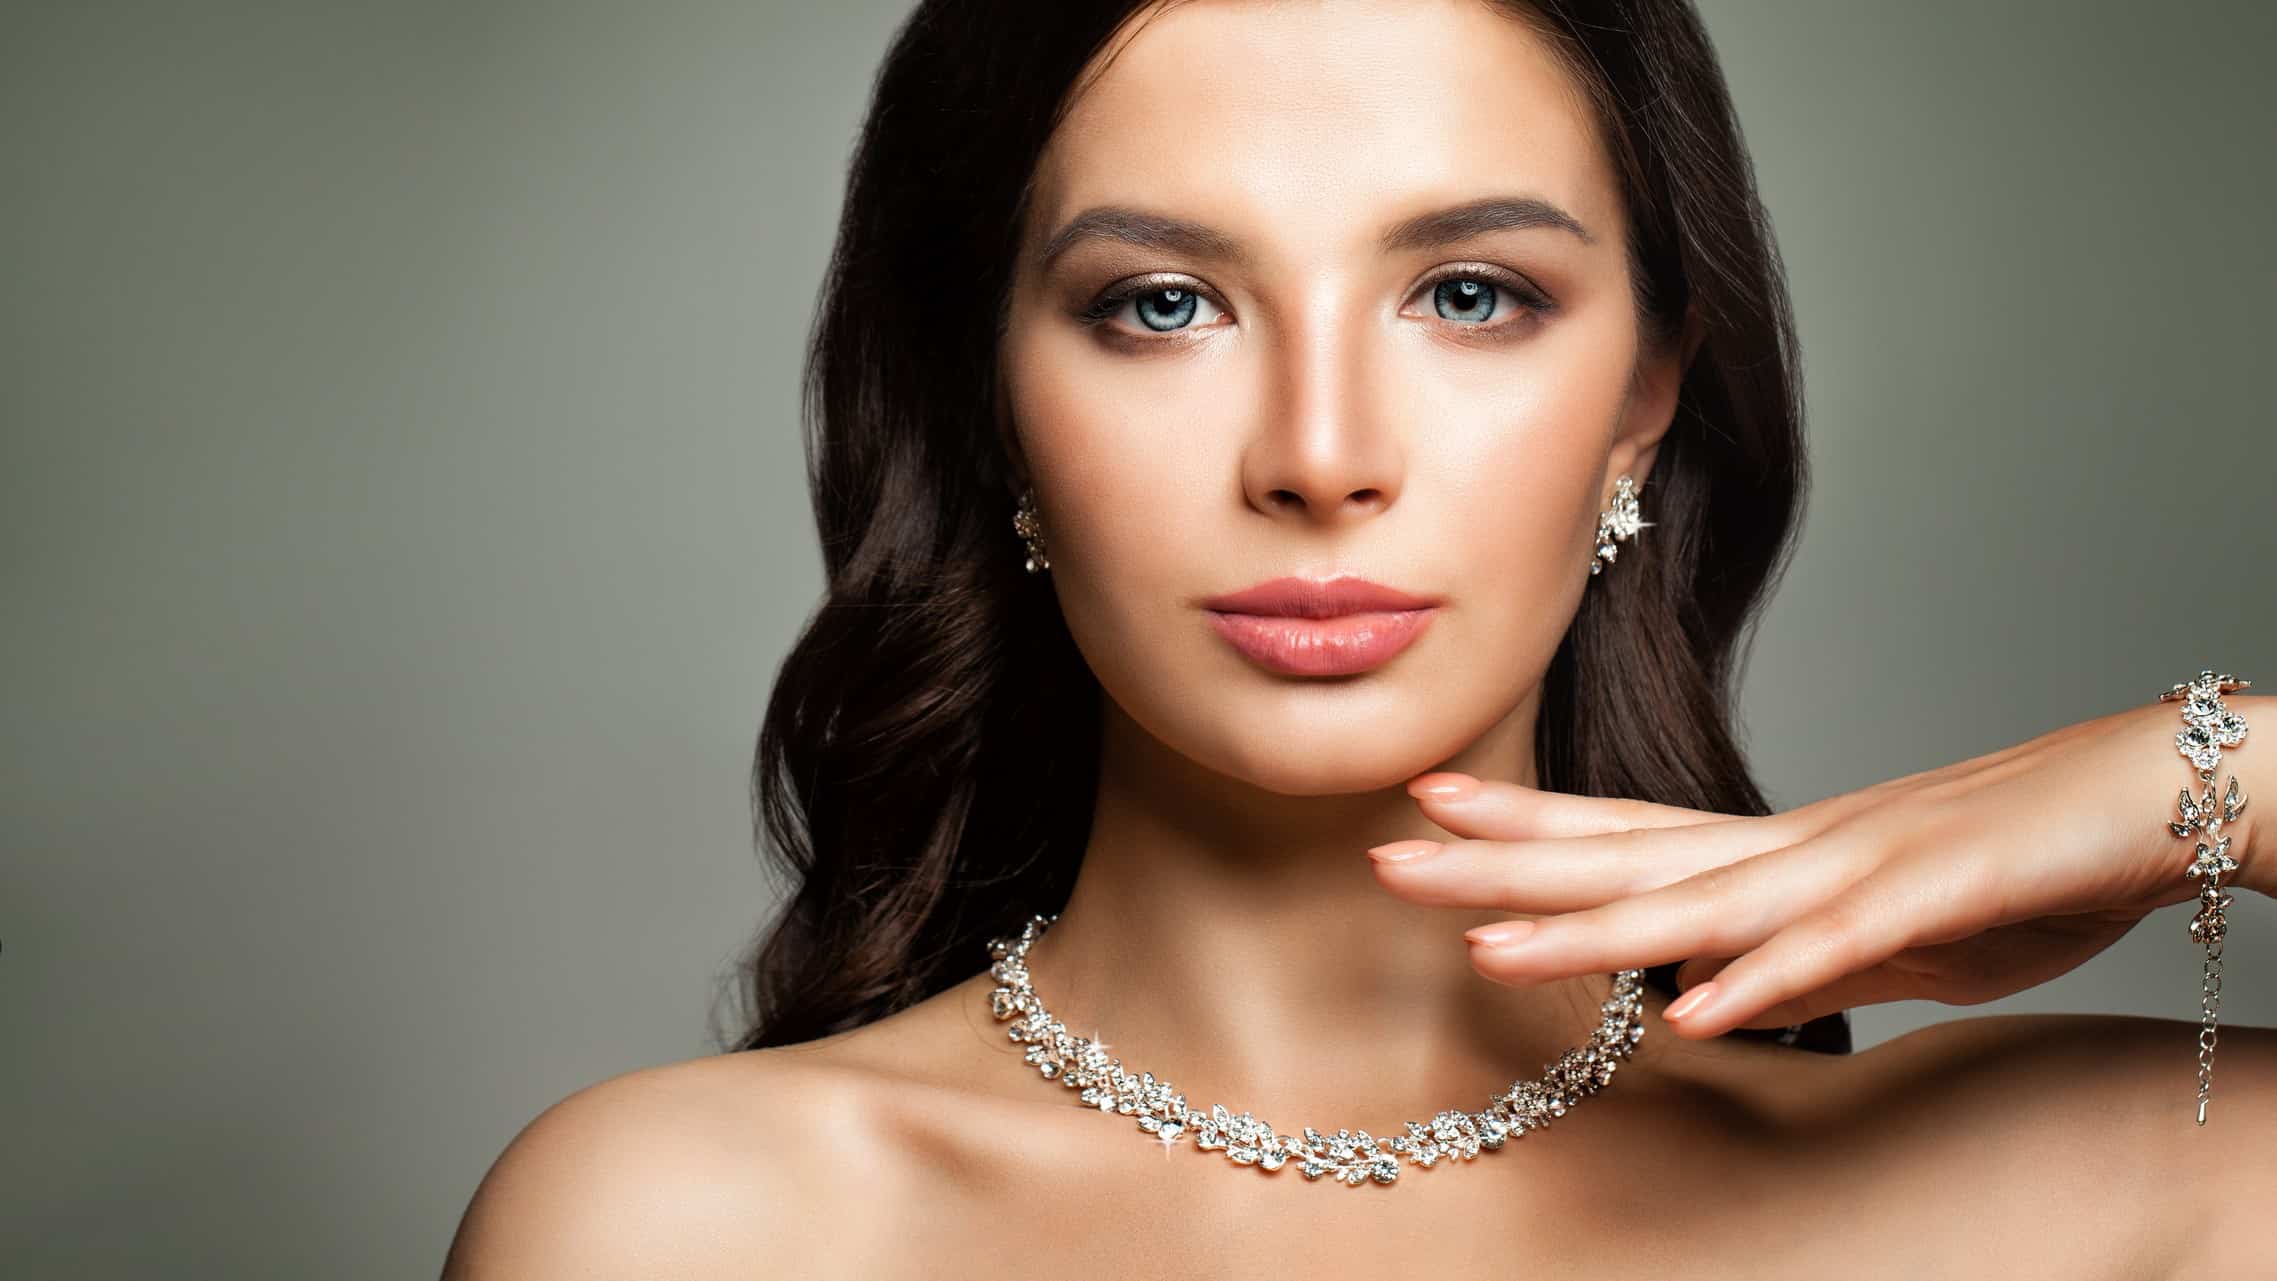 A woman stares directly ahead wearing diamond earrings, diamond necklace and diamond bracelet. as the Lovisa share price rises